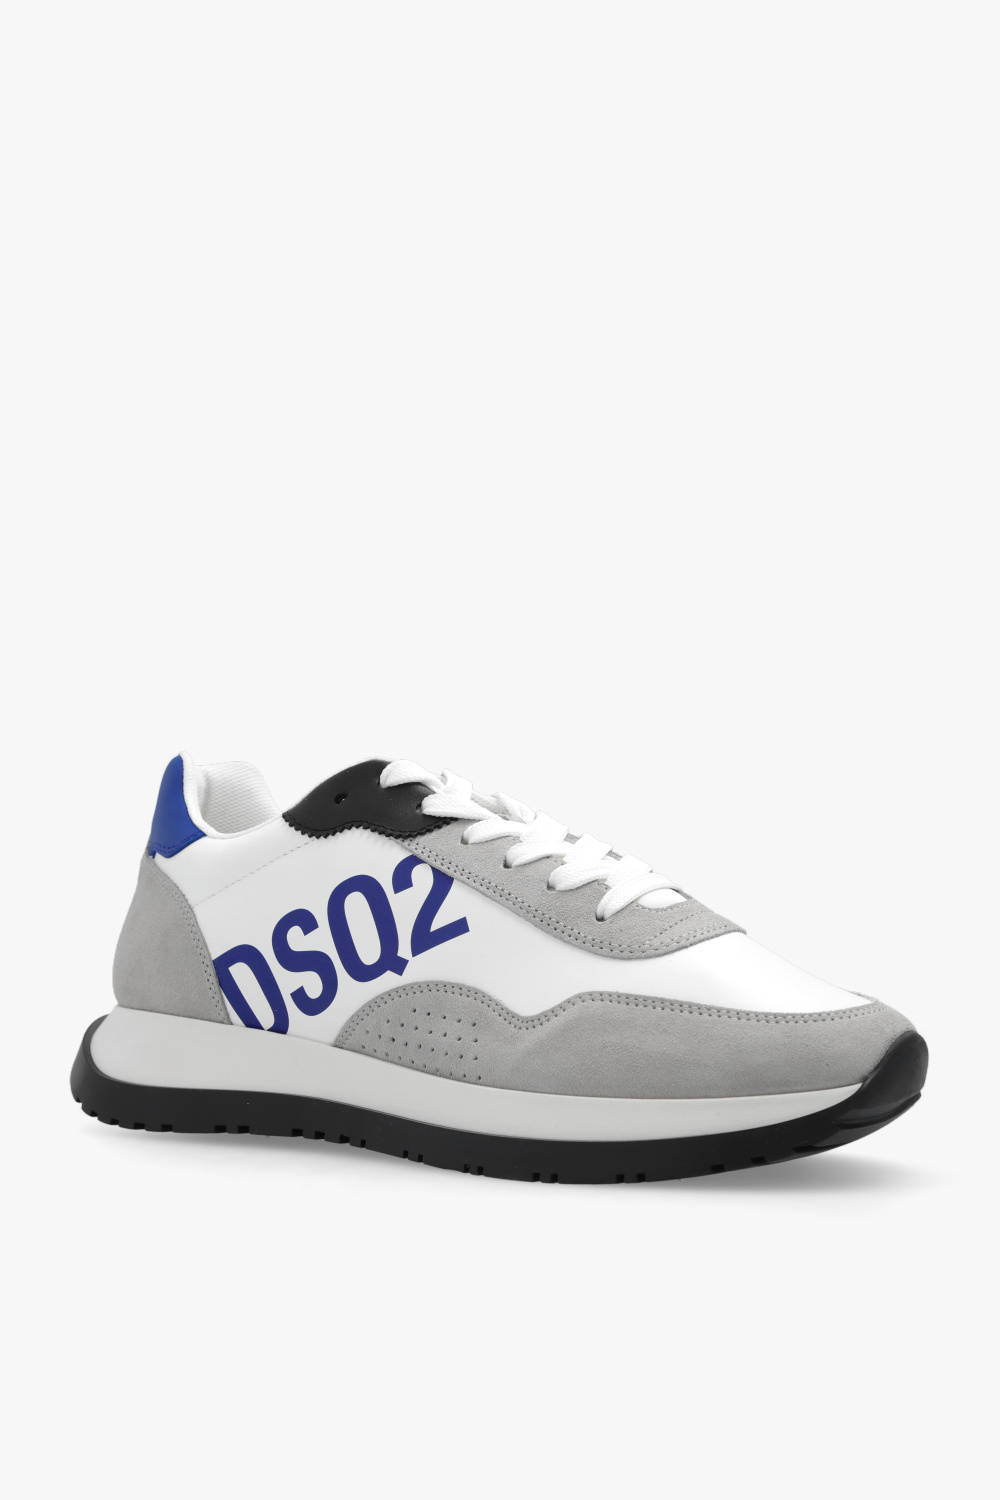 Dsquared2 ‘Running’ sneakers